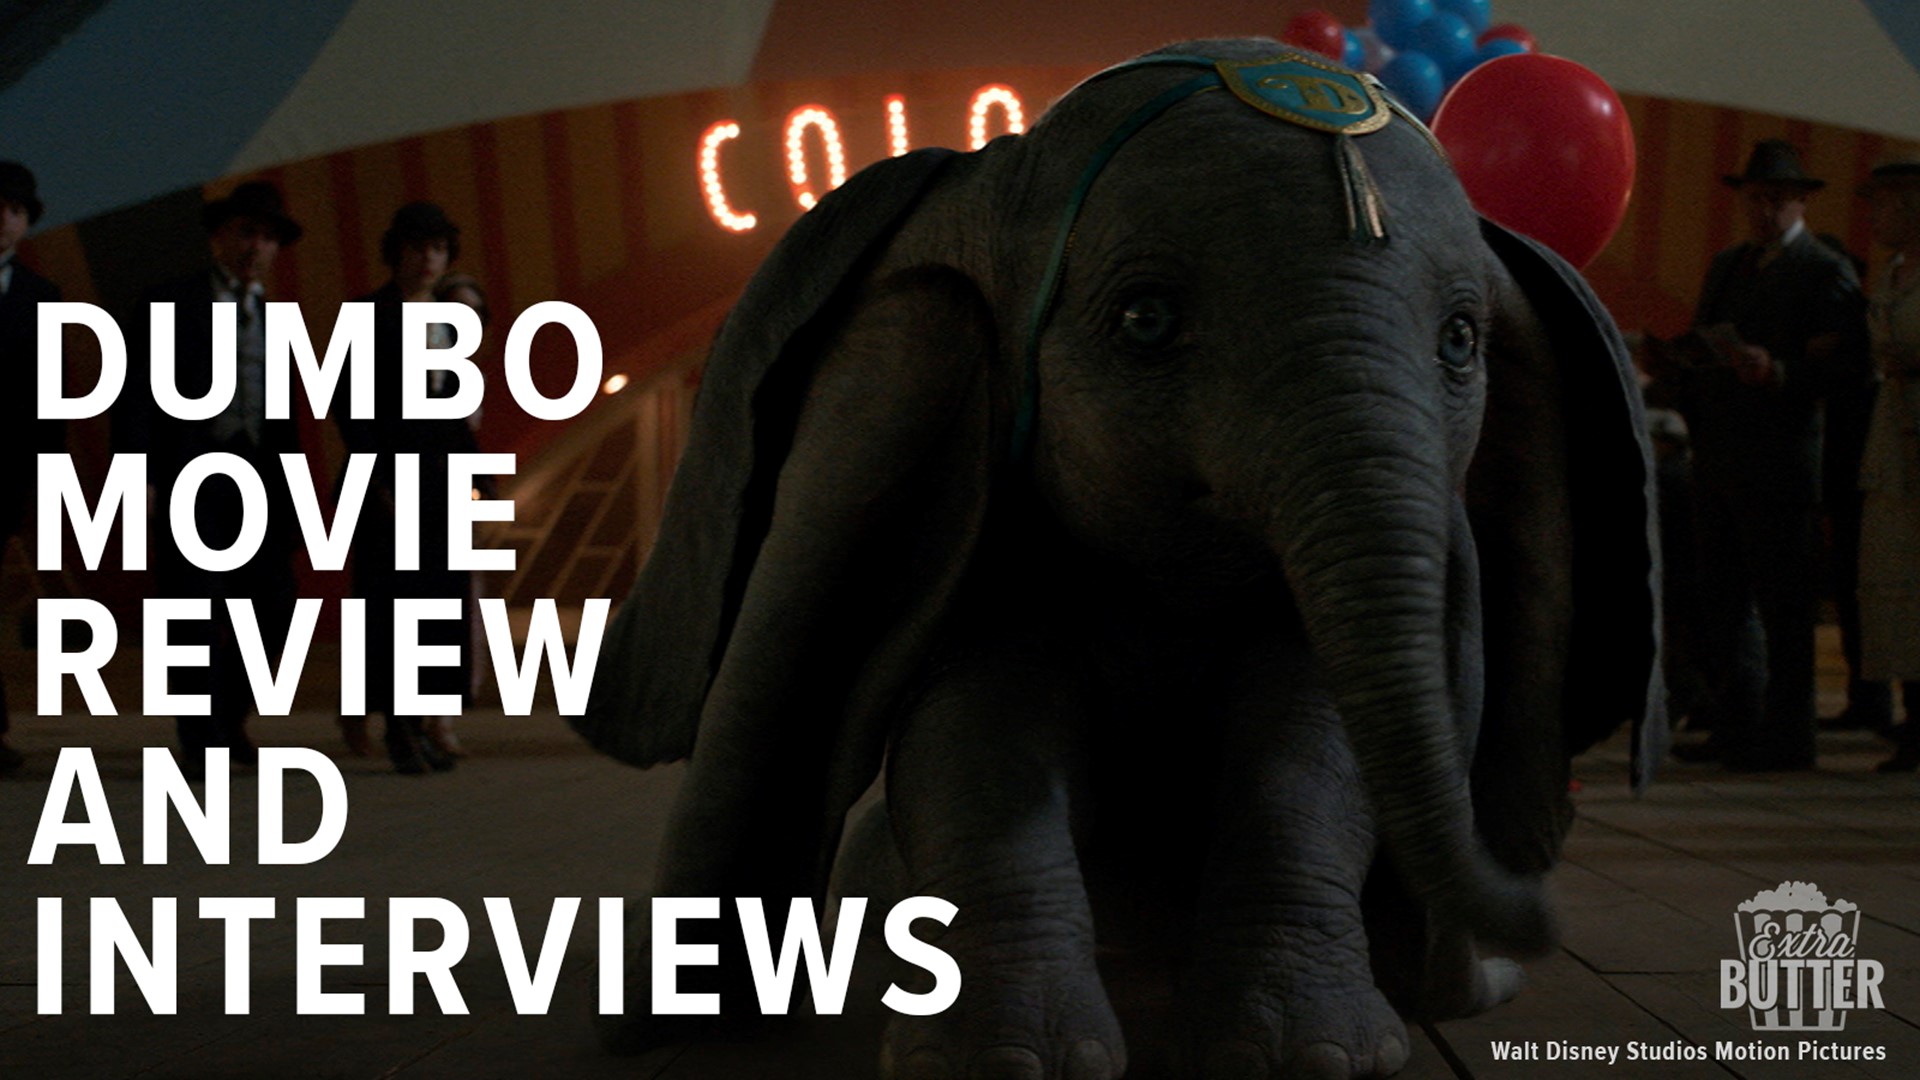 Extra Butter reviews 'Dumbo,' the new movie from director Tim Burton. Mark S. Allen talks with the stars of the movie, including Danny DeVito, Colin Farrell and Eva Green. Interviews arranged by Walt Disney Studios Motion Pictures.